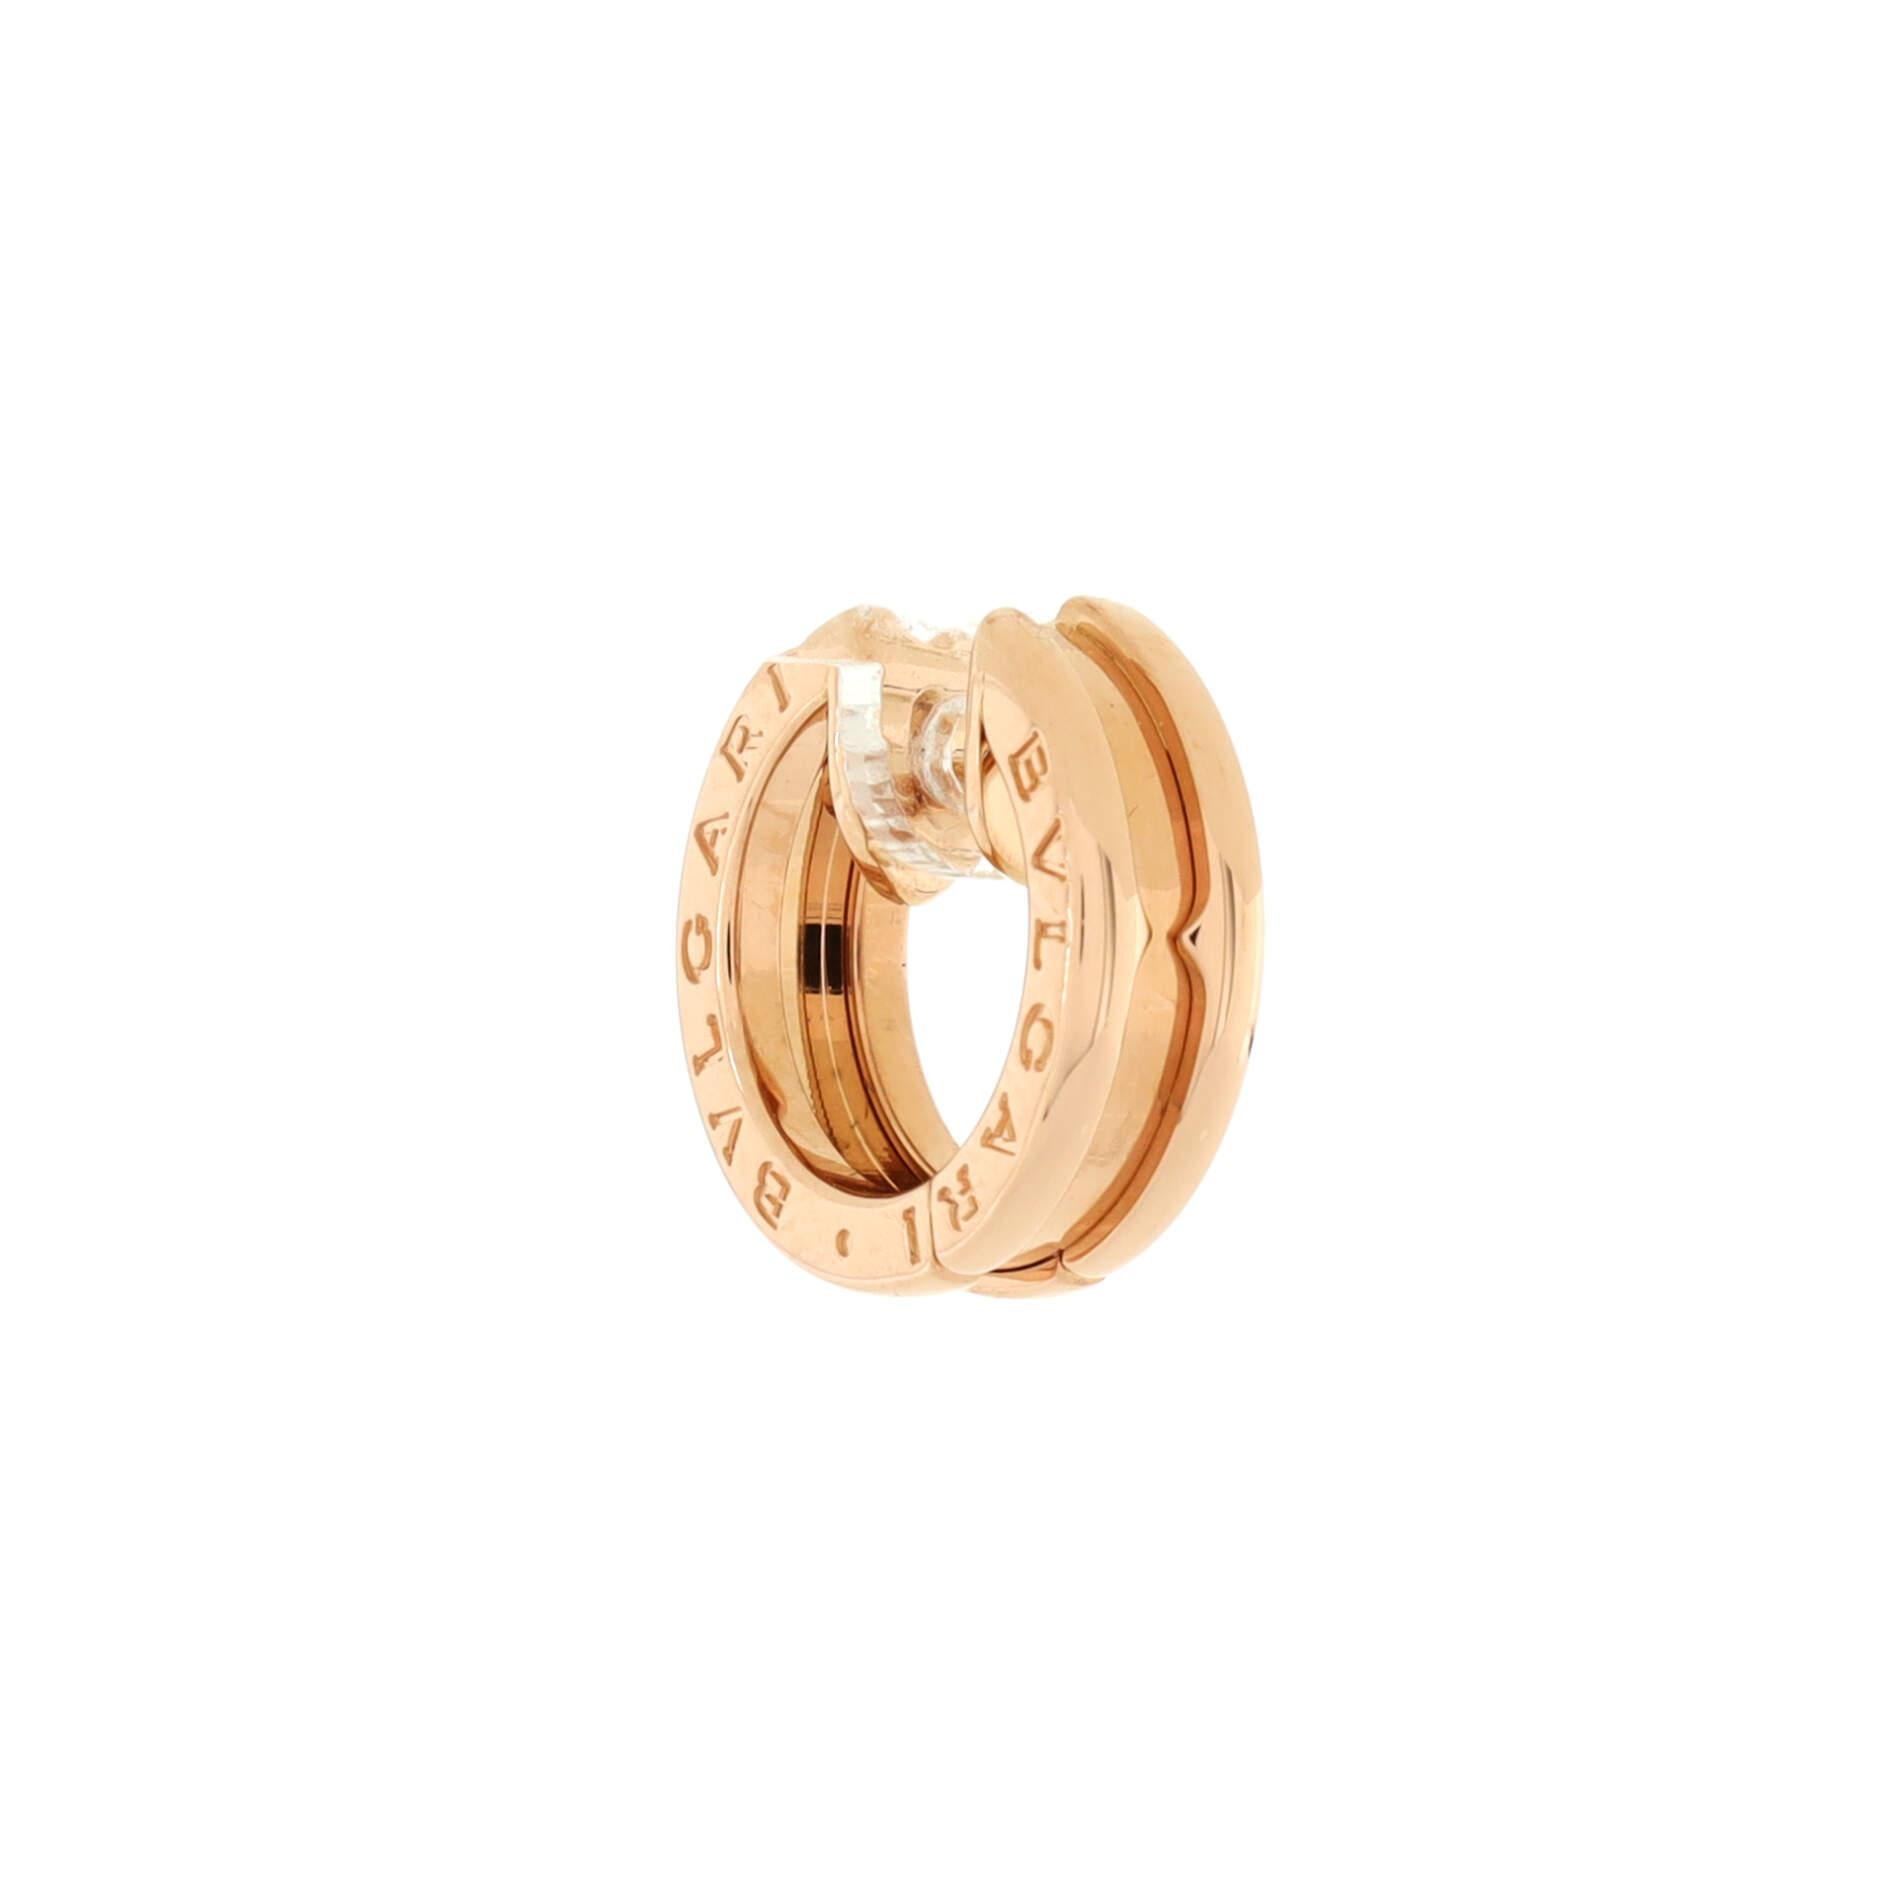 Condition: Great. Minor wear throughout.
Accessories: No Accessories
Measurements: Height/Length: 14.70 mm, Width: 4.90 mm
Designer: Bvlgari
Model: B.Zero1 Hoop Earrings 18K Rose Gold
Exterior Color: Rose Gold
Item Number: 208648/441